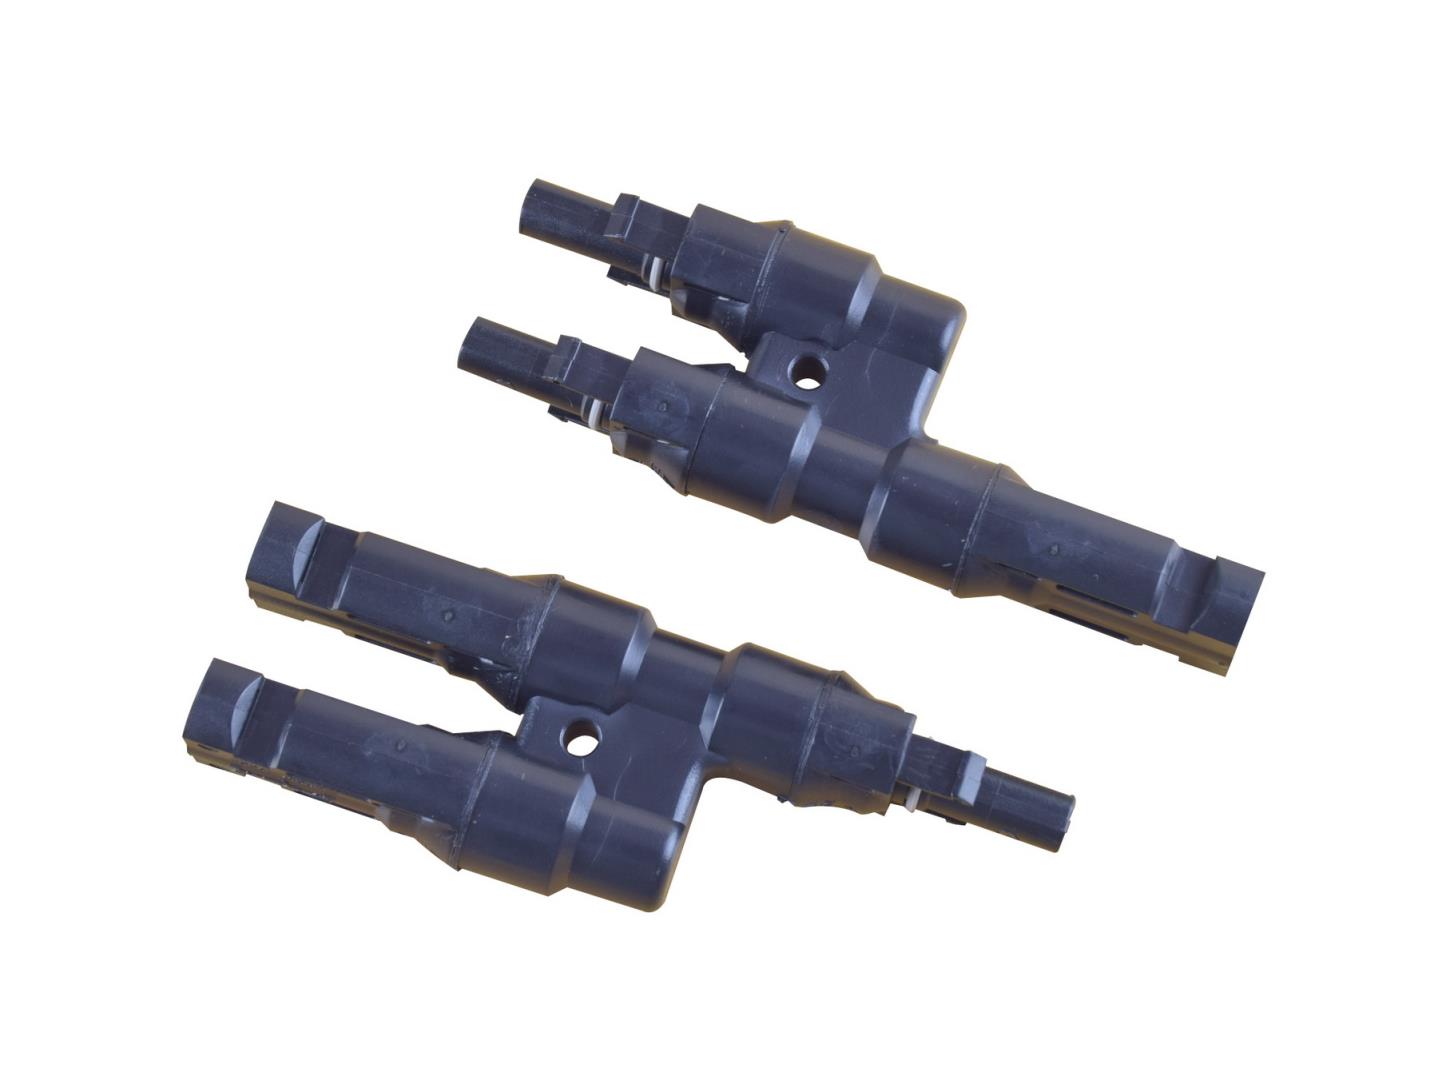 MC4 2 to 1 connector